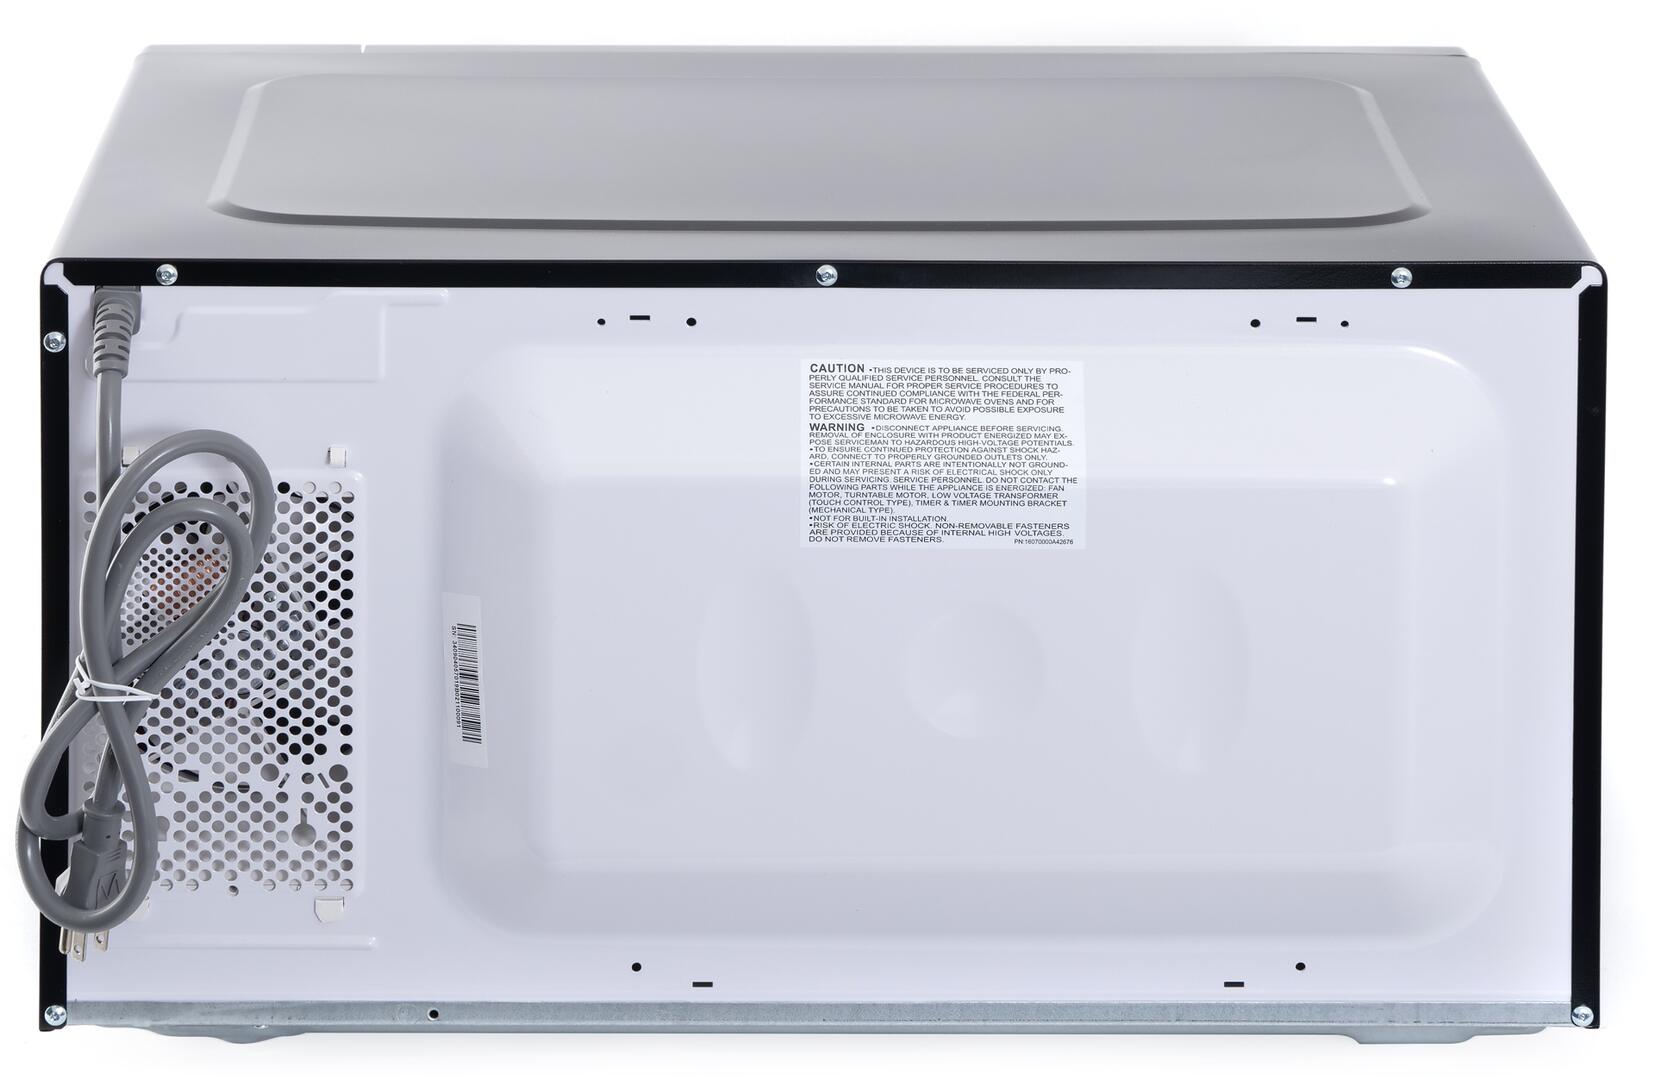 Cosmo - COS-BIM22SSB 24 in Countertop Microwave Oven with 2.2 cu. ft. Capacity | COS-BIM22SSB